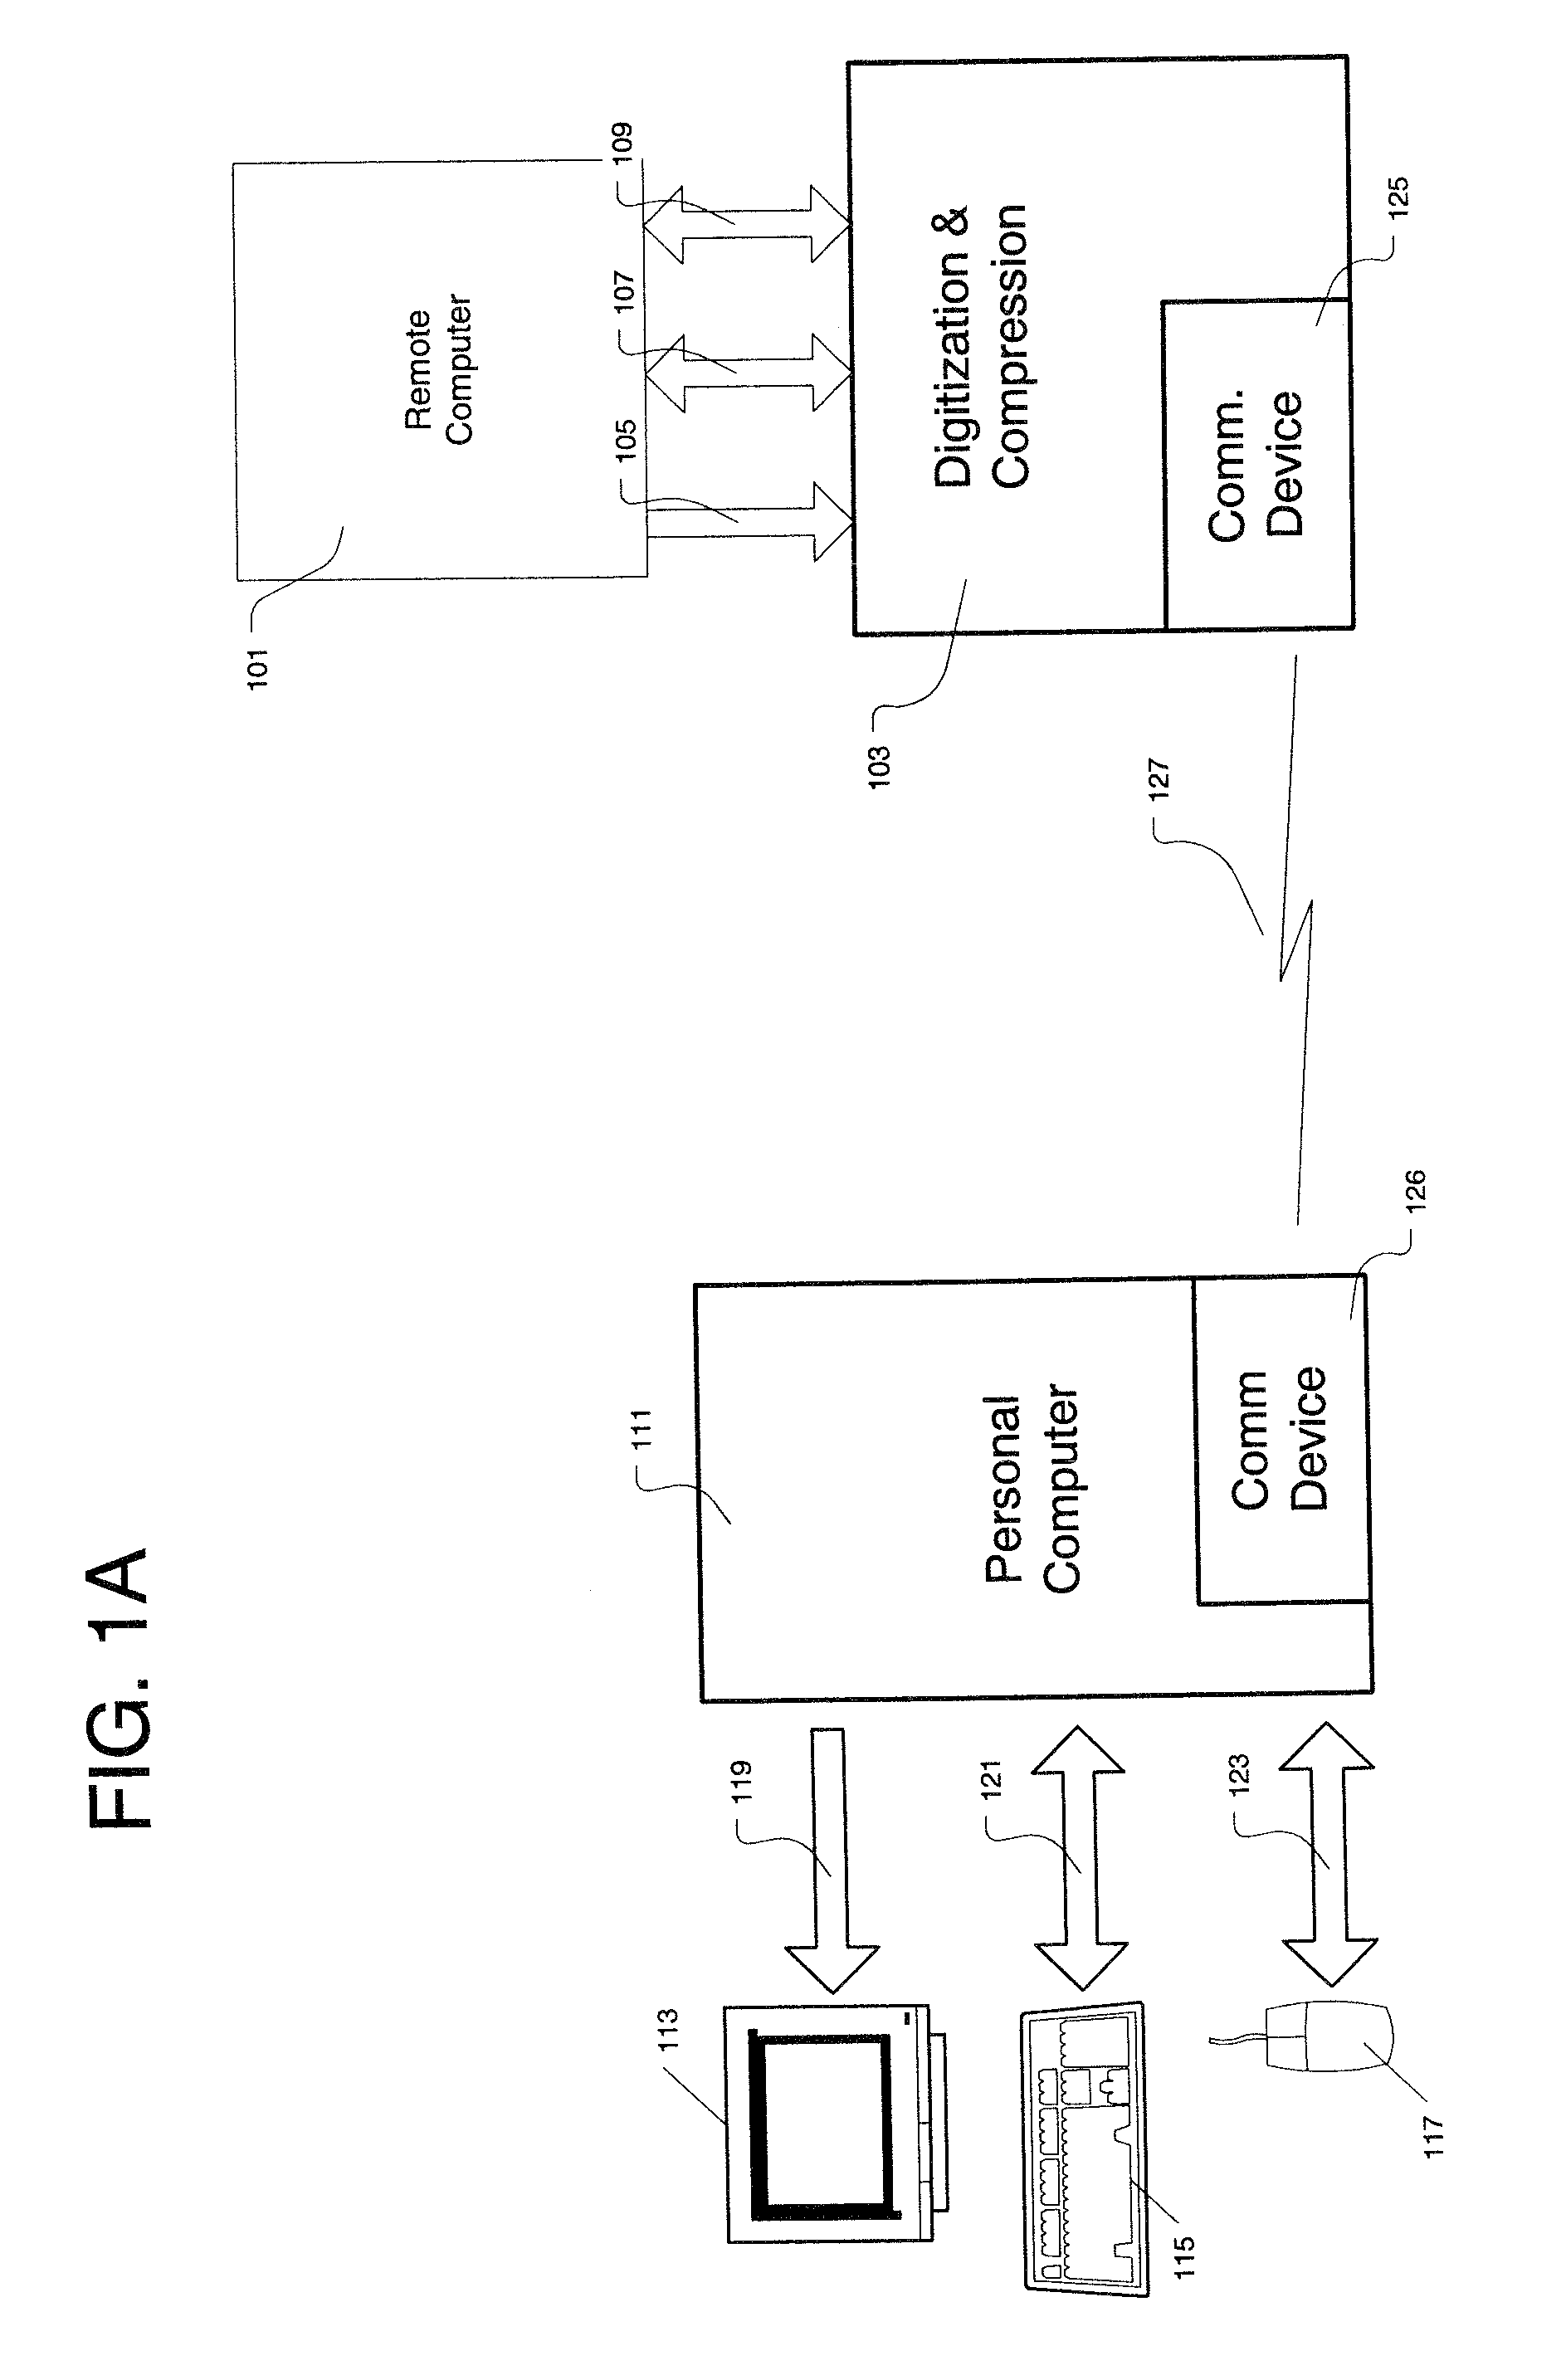 Method And Apparatus For Digitizing And Compressing Remote Video Signals